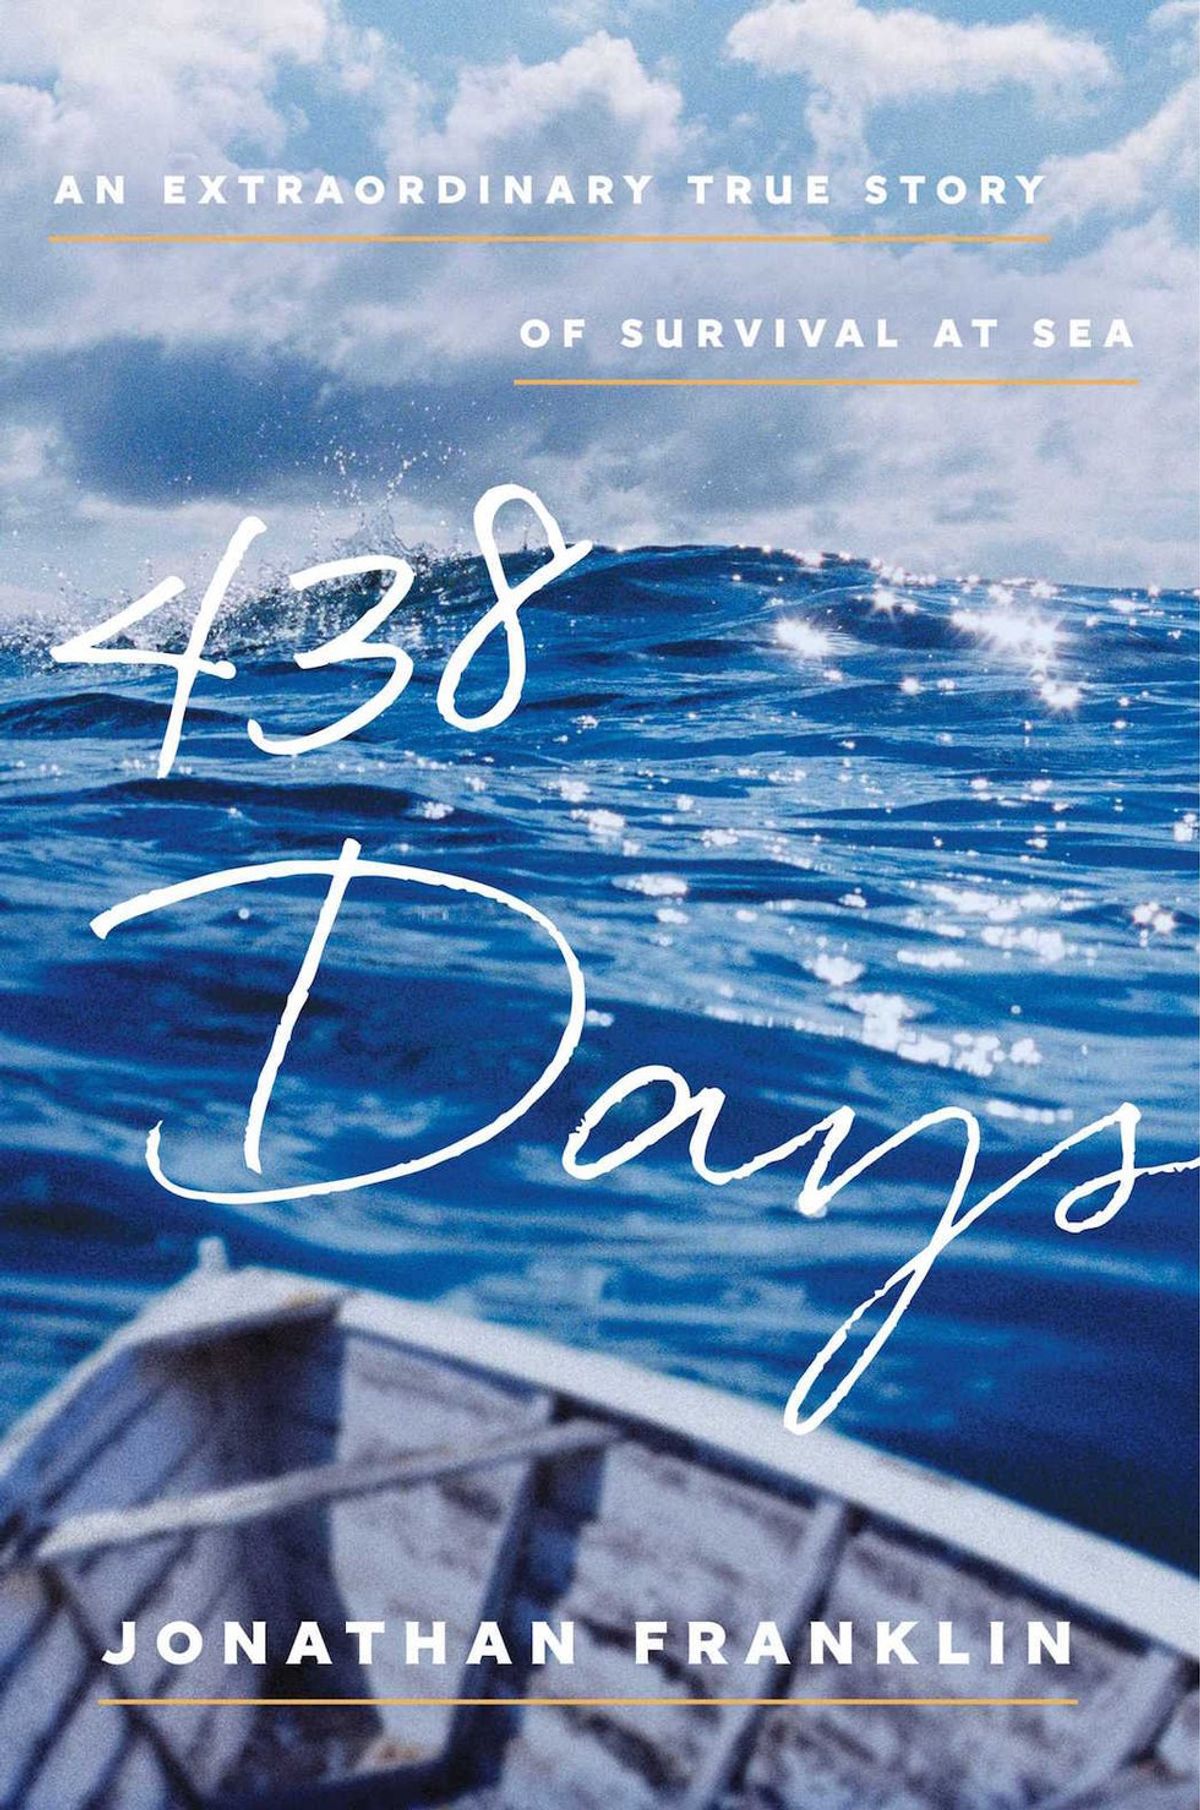 438 Days: The Miraculous Survival Of A “Sharker”